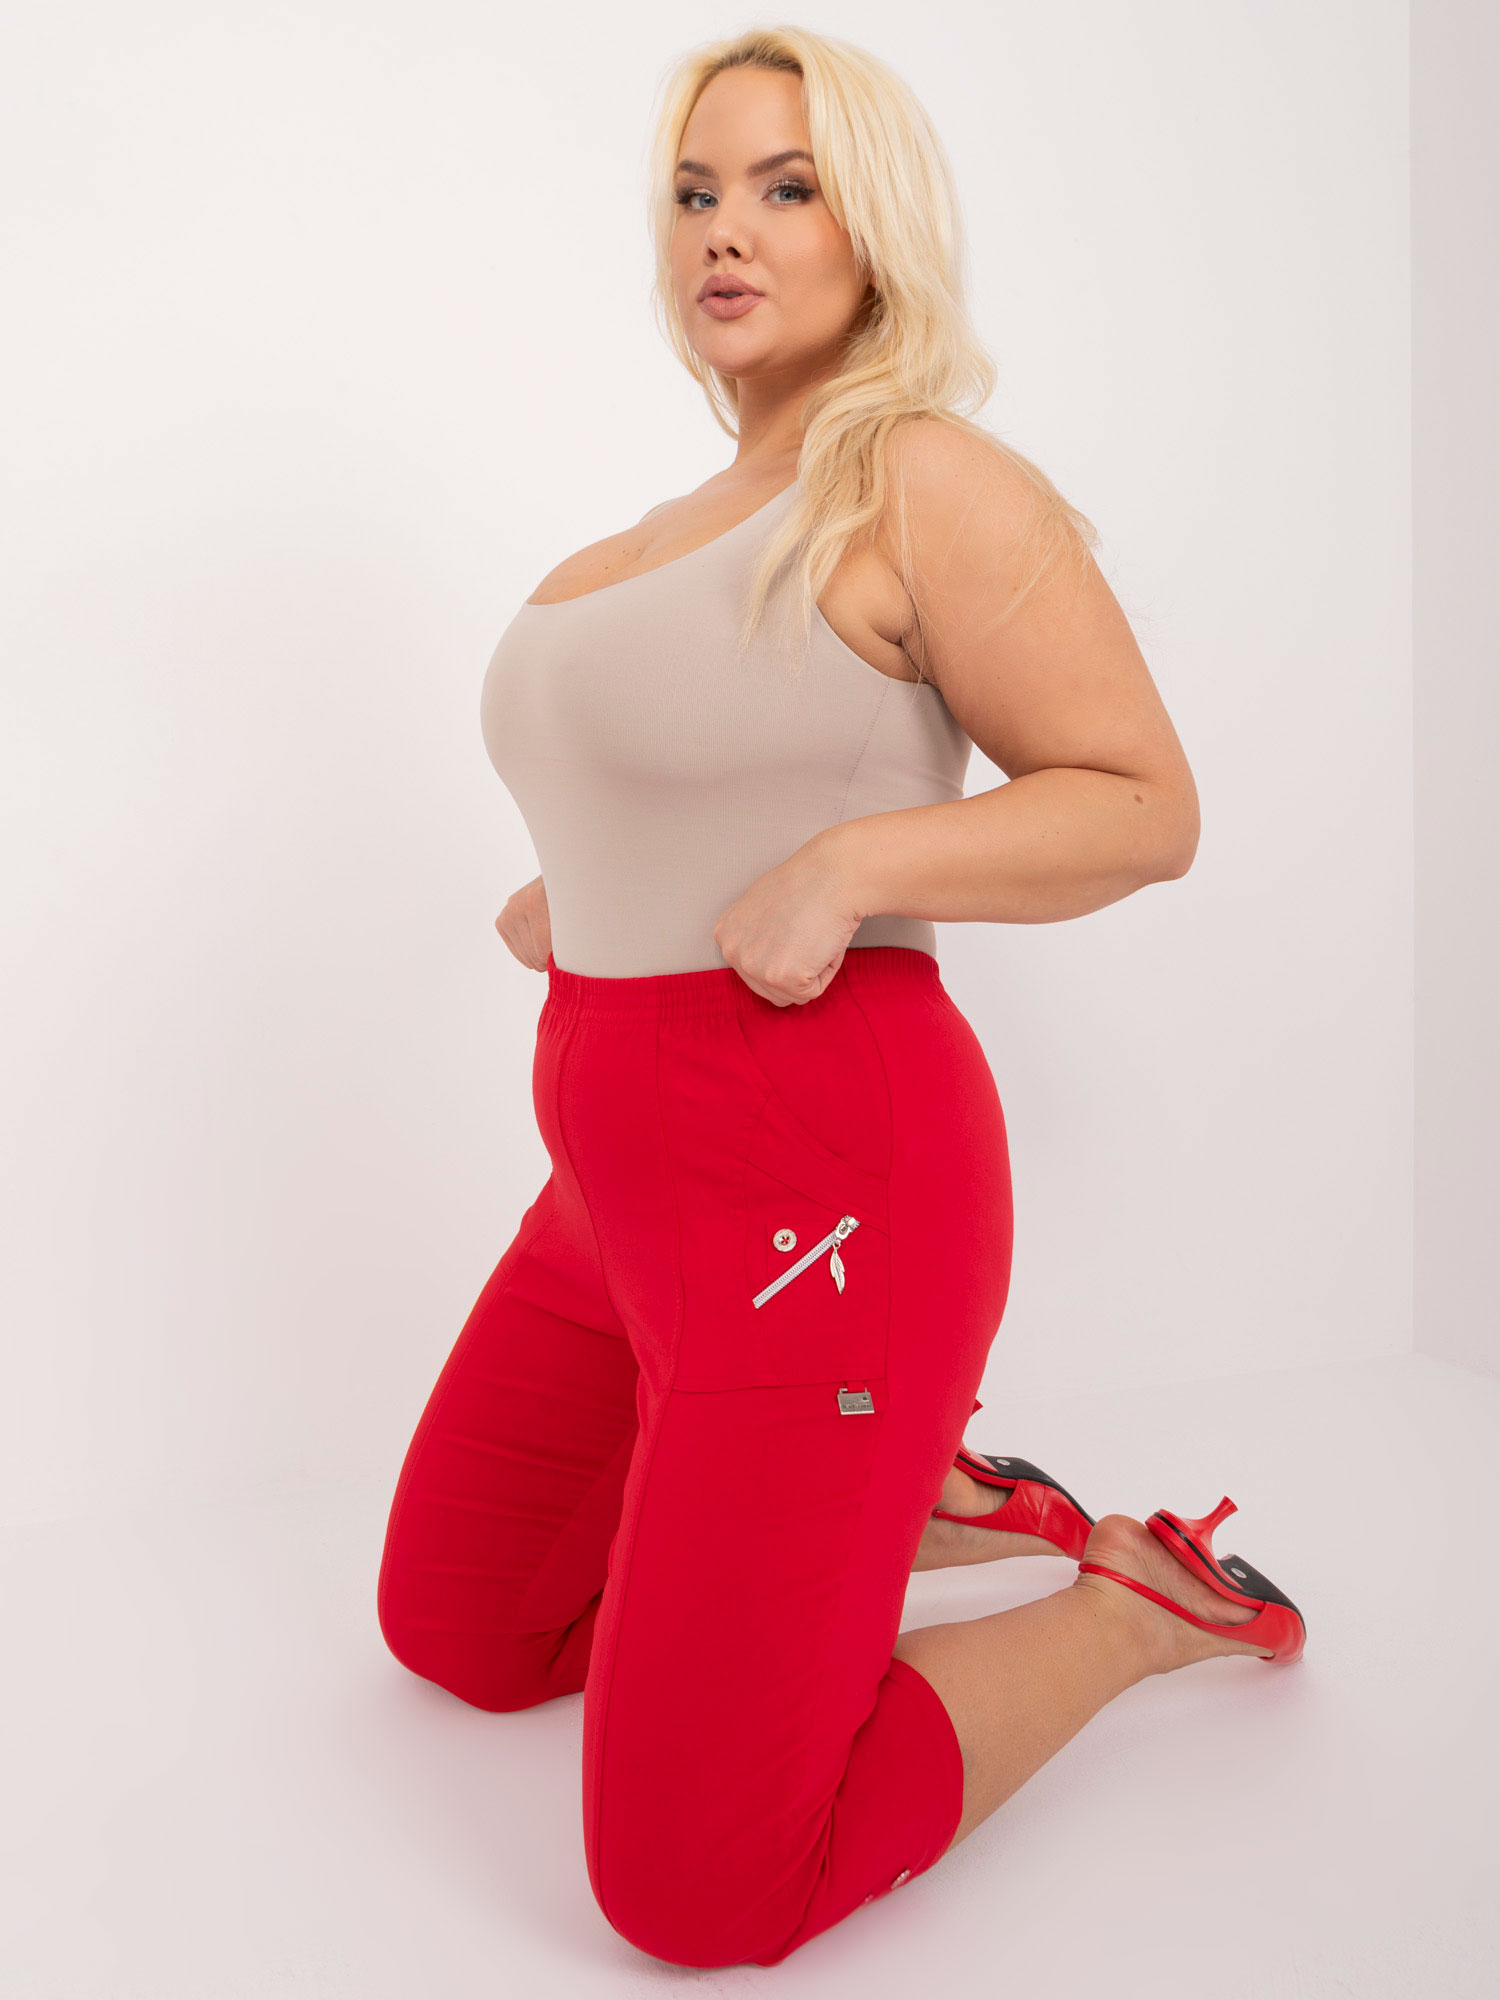 Red fitted trousers in size 3/4 plus